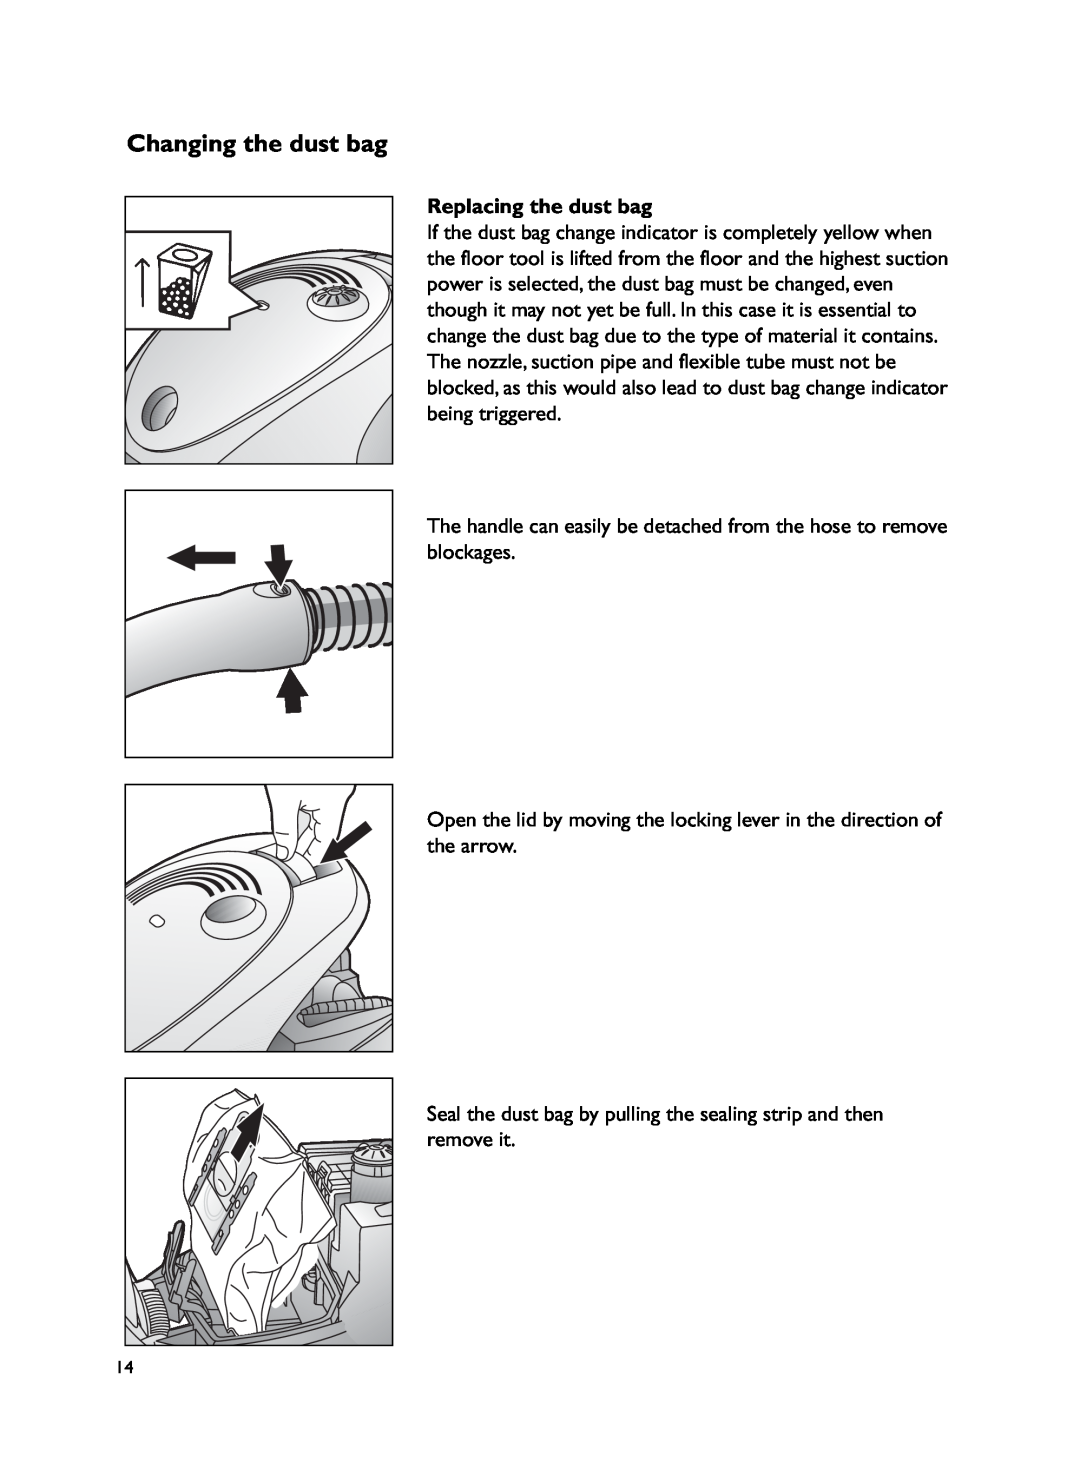 John Lewis JLVS06 instruction manual Changing the dust bag, Replacing the dust bag 